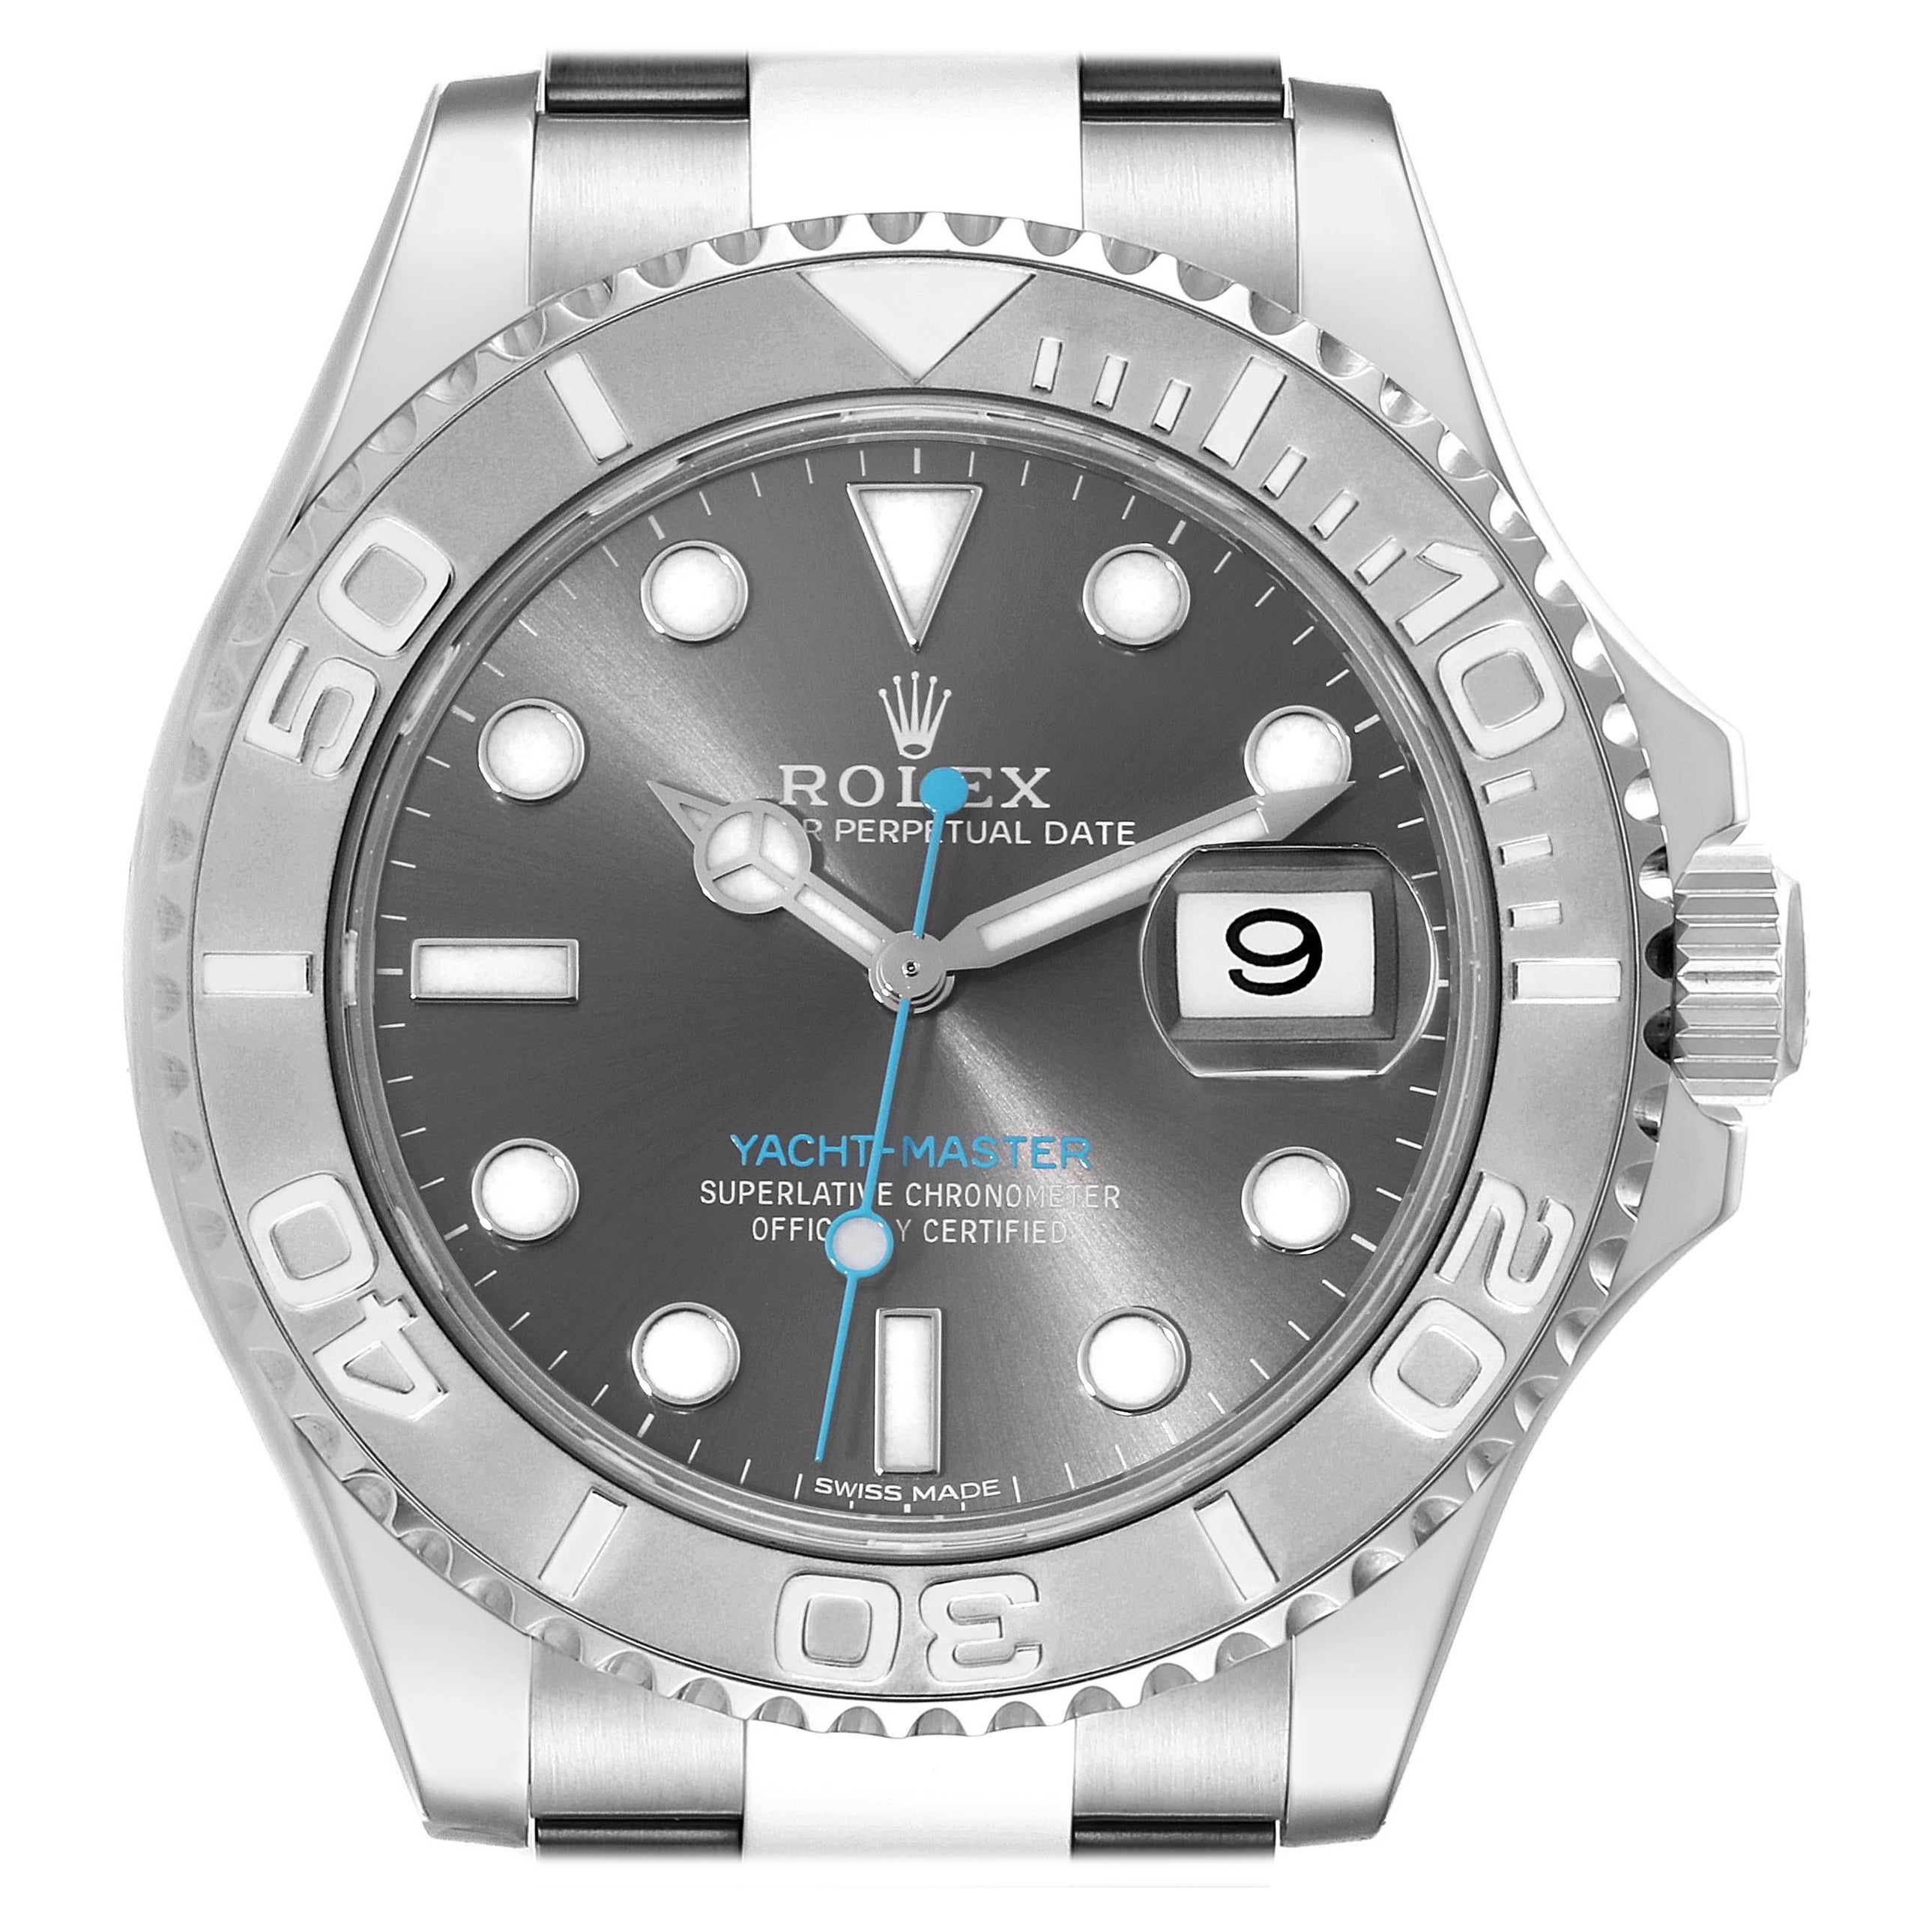 Rolex Yachtmaster Rhodium Dial Steel Platinum Mens Watch 116622 Box Card For Sale